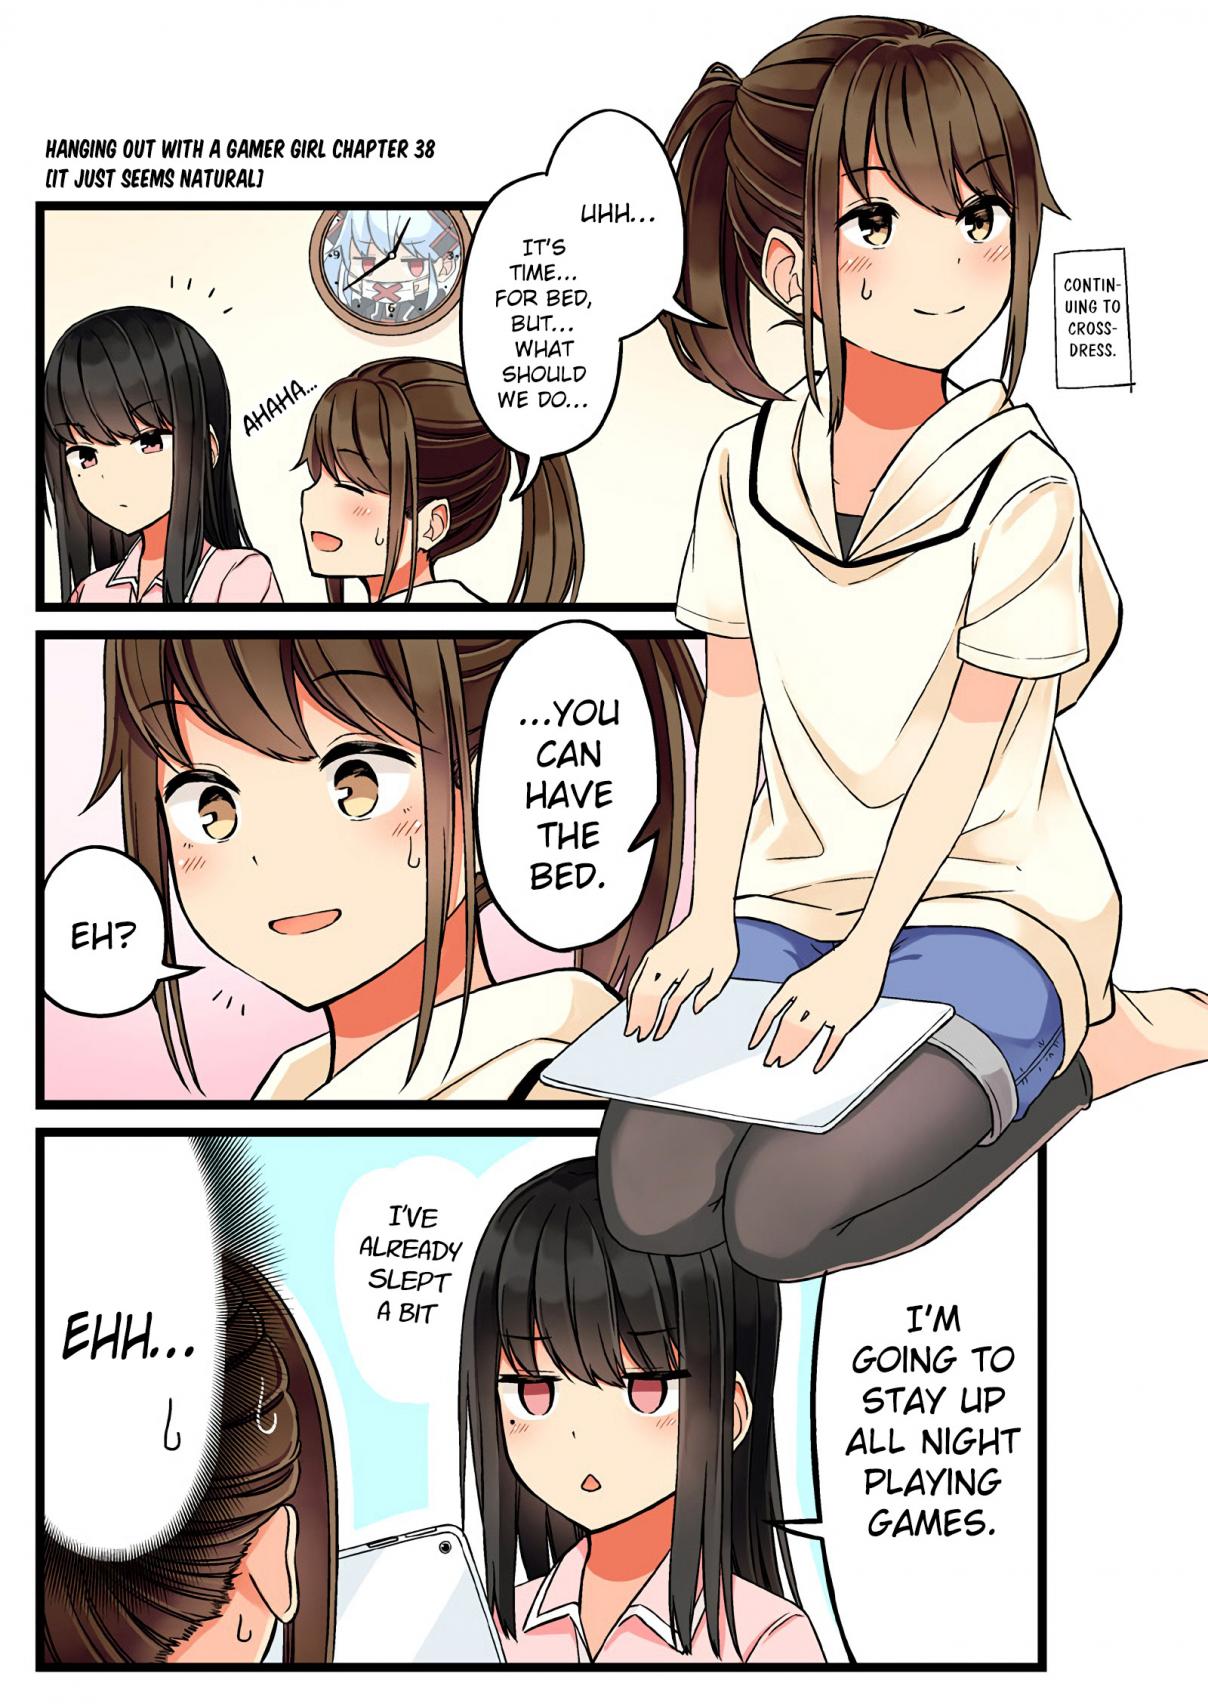 Hanging Out with a Gamer Girl Ch. 38 It Just Seems Natural